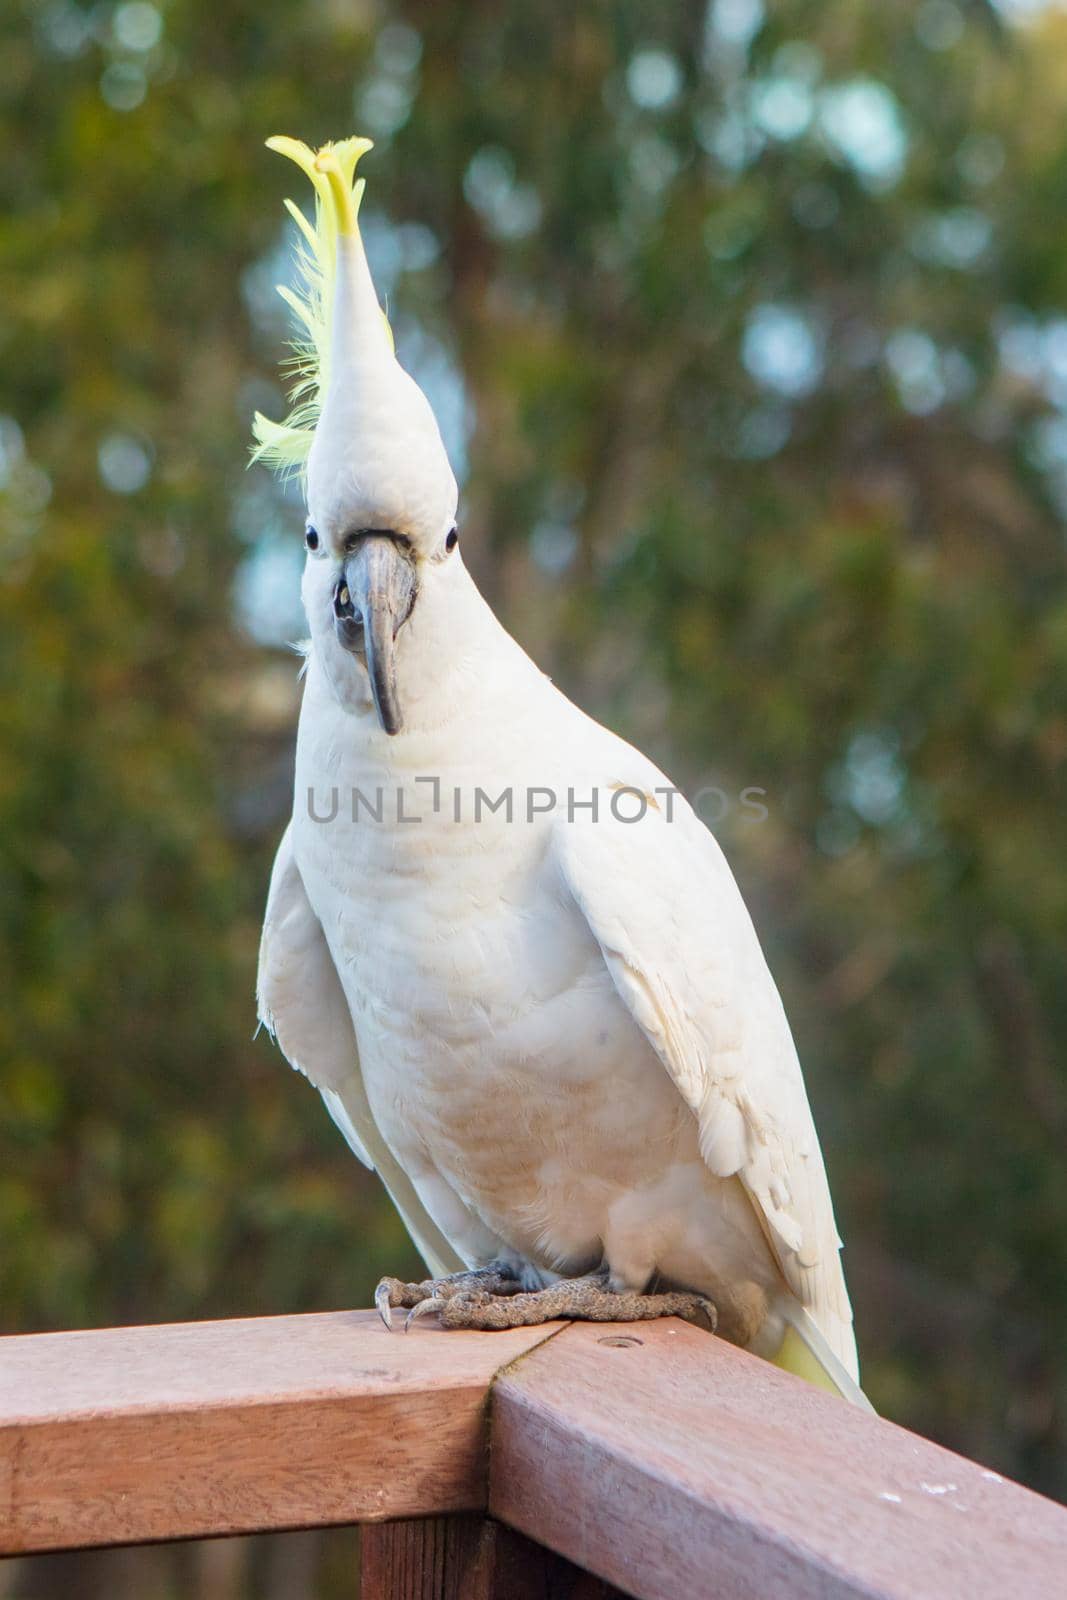 A wild yellow-crested cockatoo being fed in a garden near Lorne in Victoria, Australia